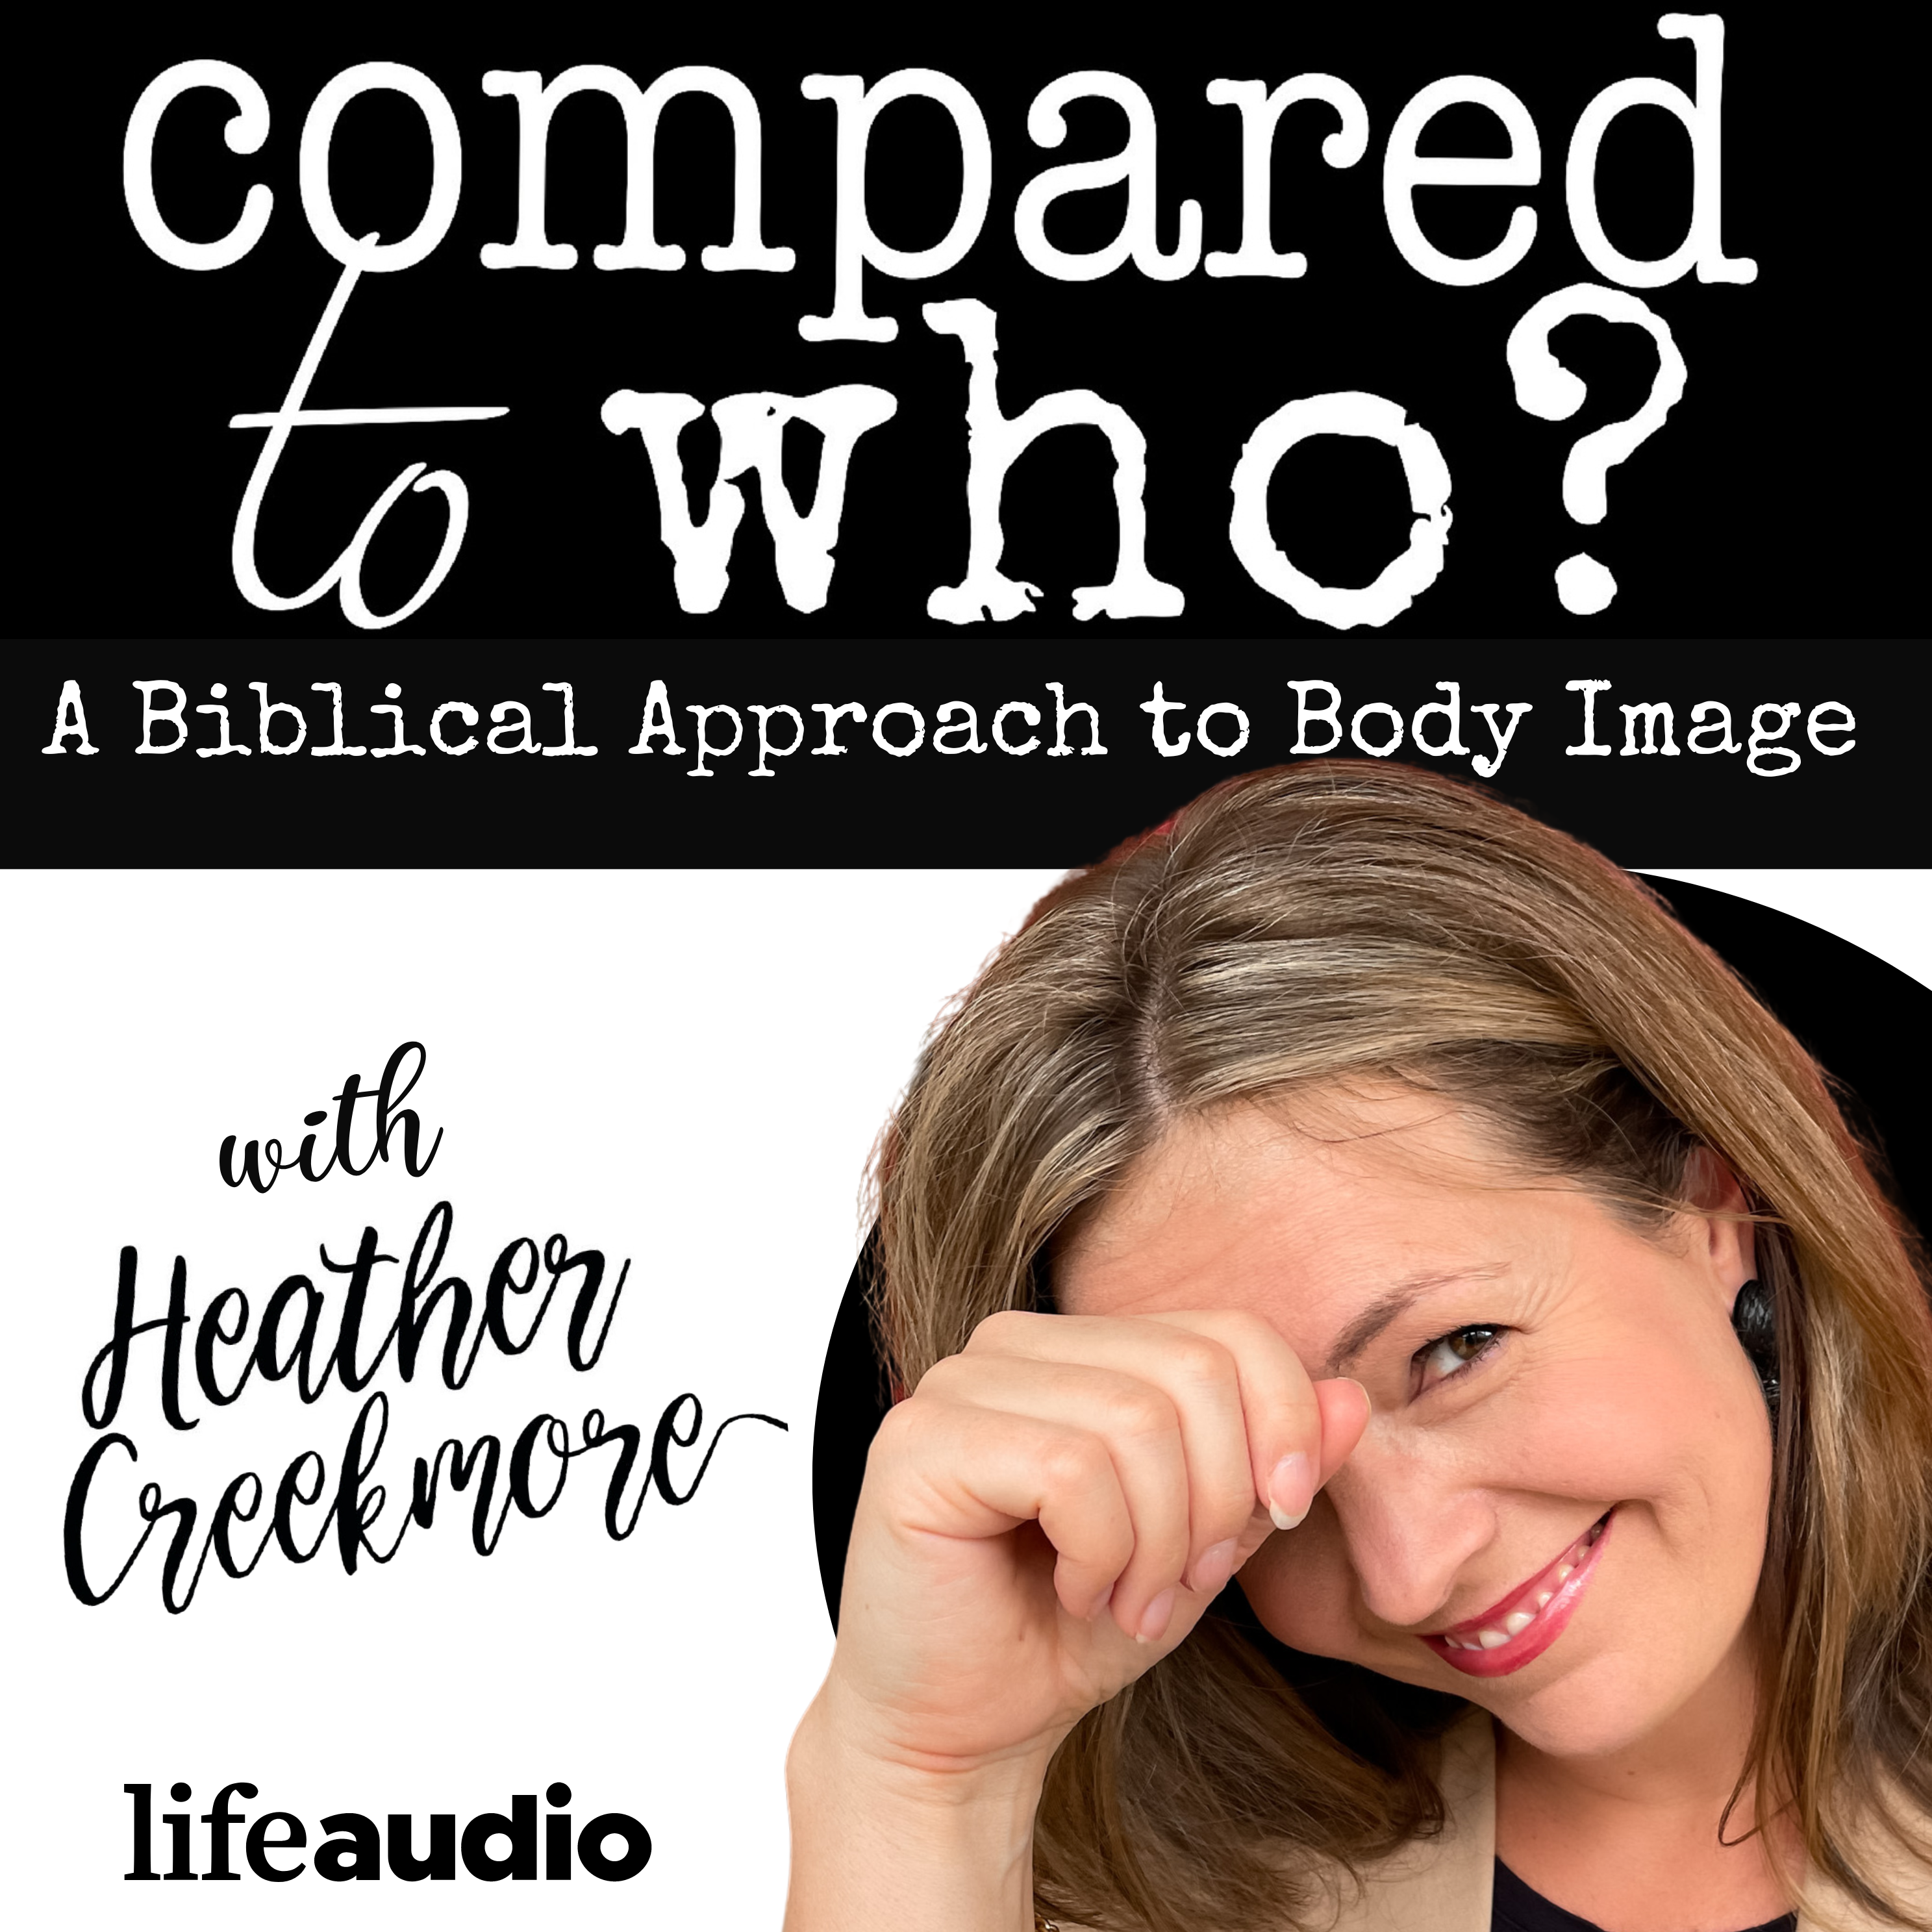 Contentment and Sanctification Improving Body Image Issues: Live Coaching Call Featuring Presli